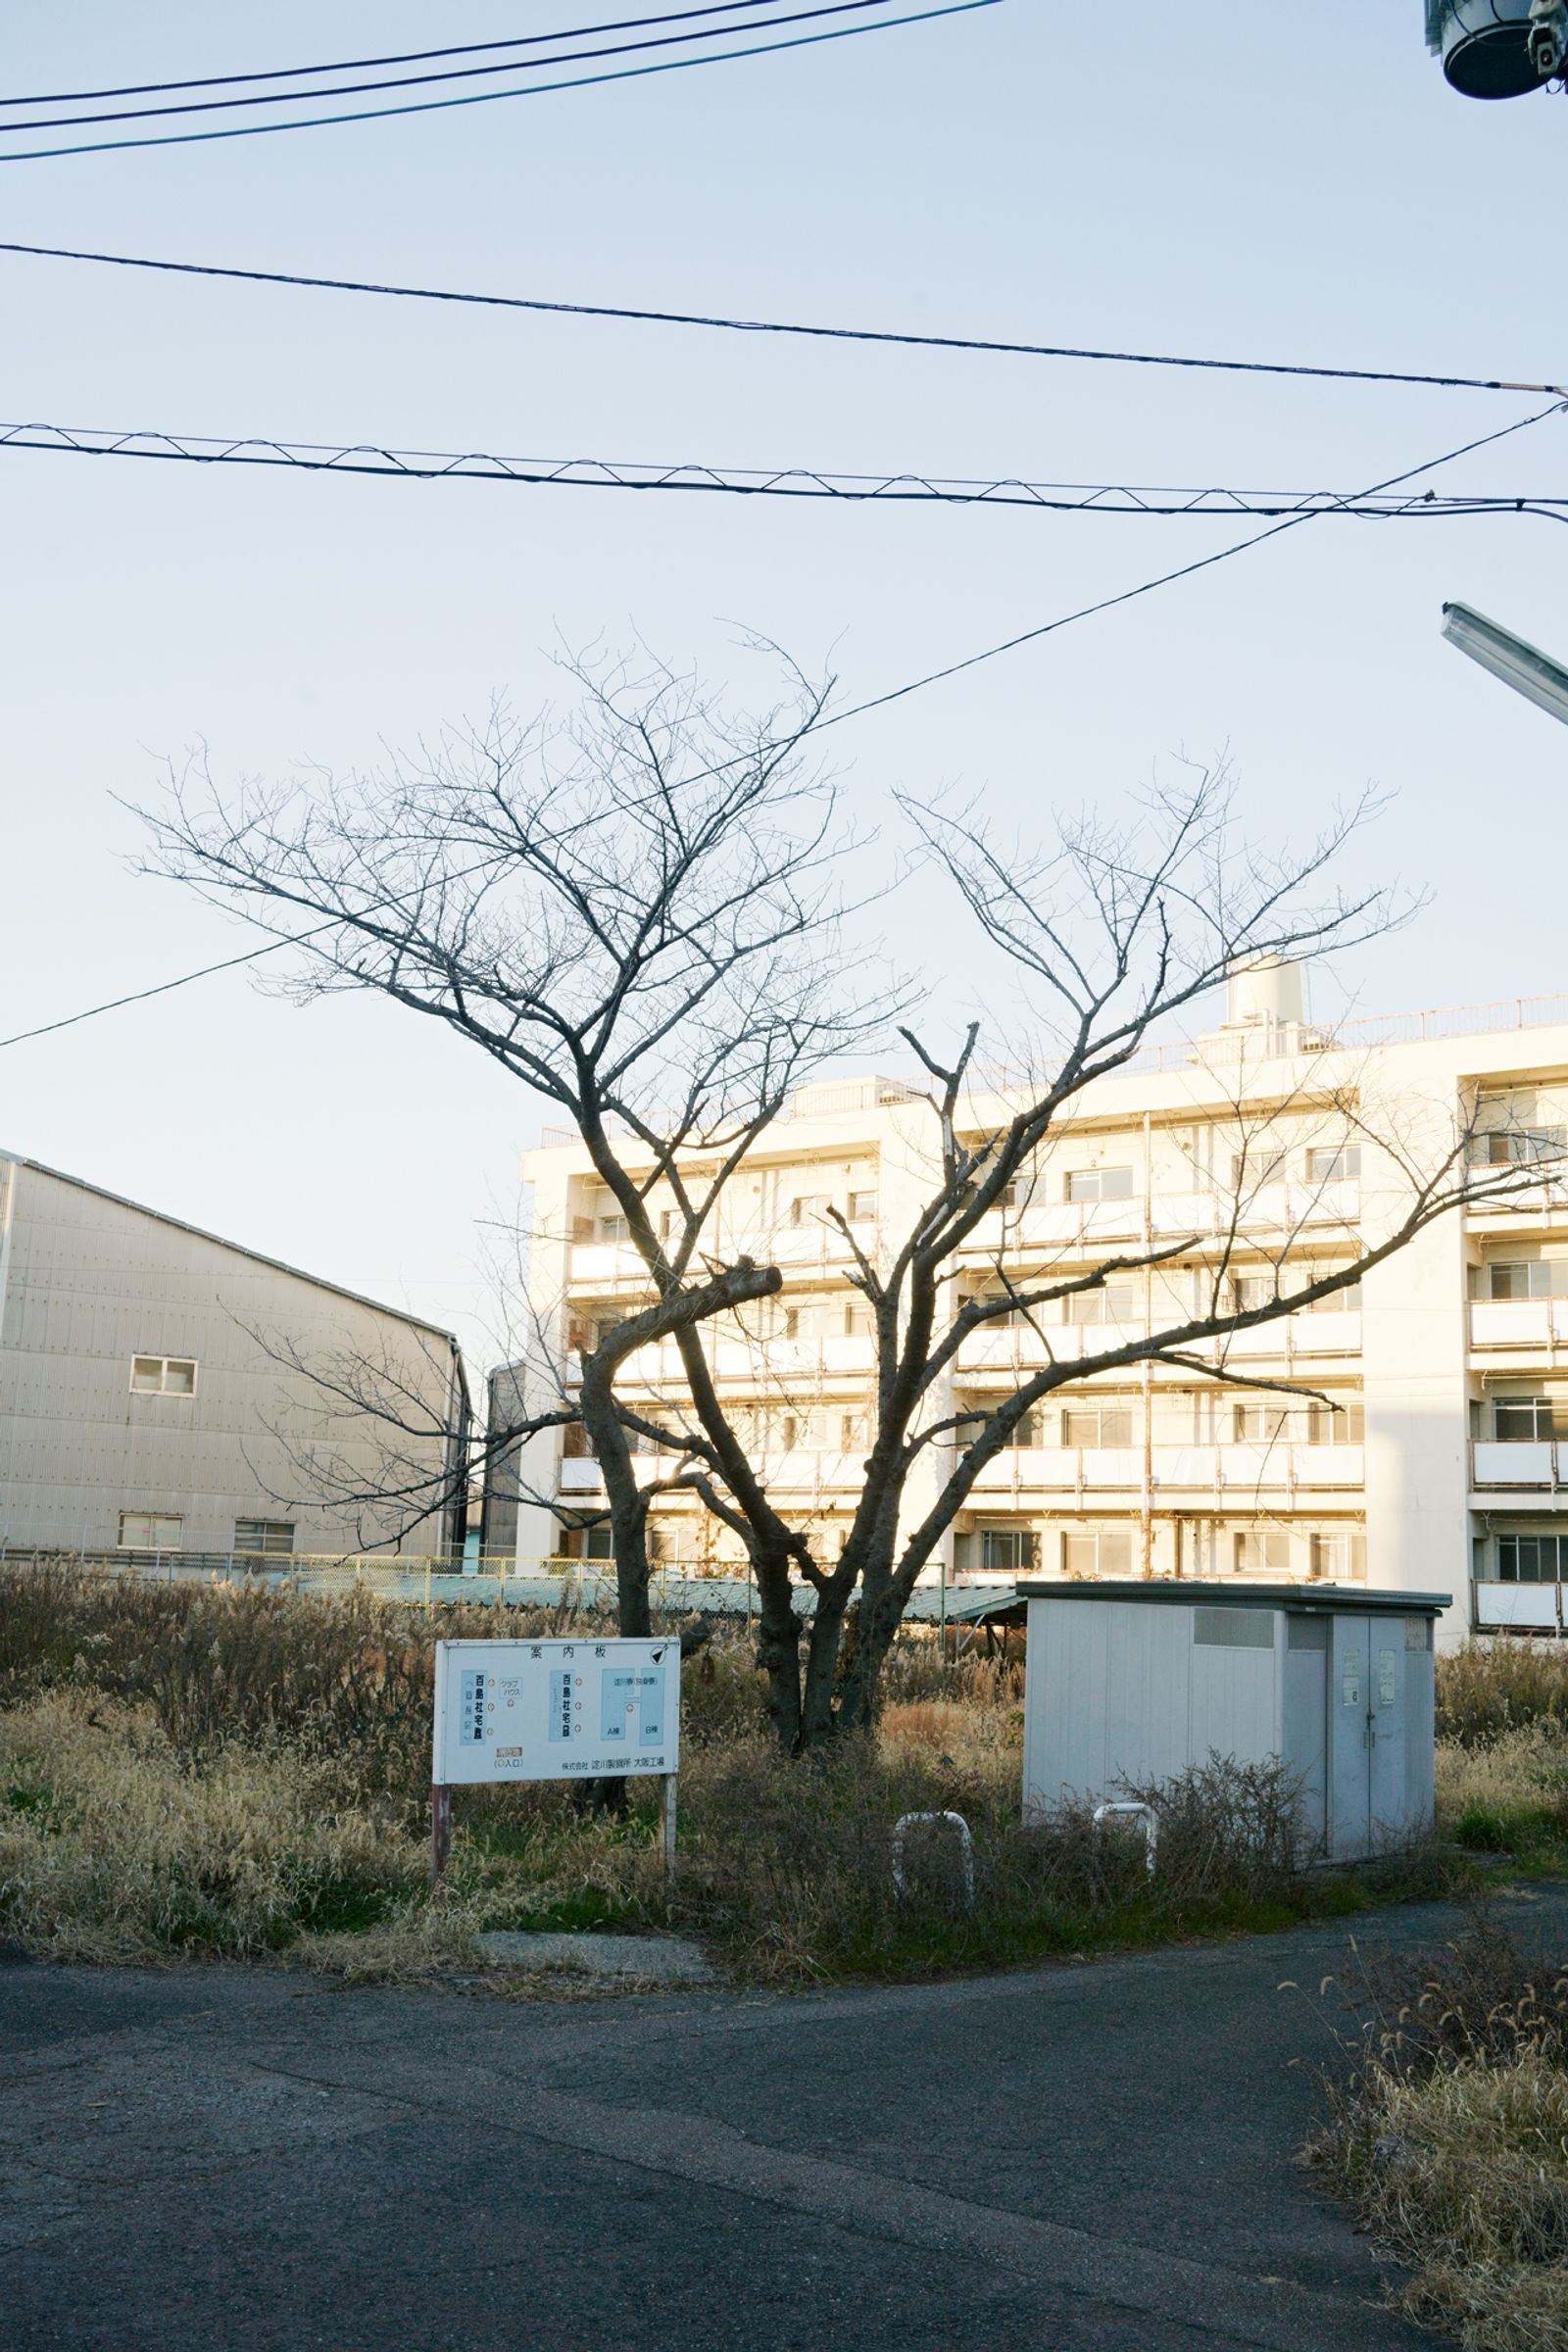 © Fabian Hammerl - Image from the A House in Omihachiman: Sixteen Perambulations photography project